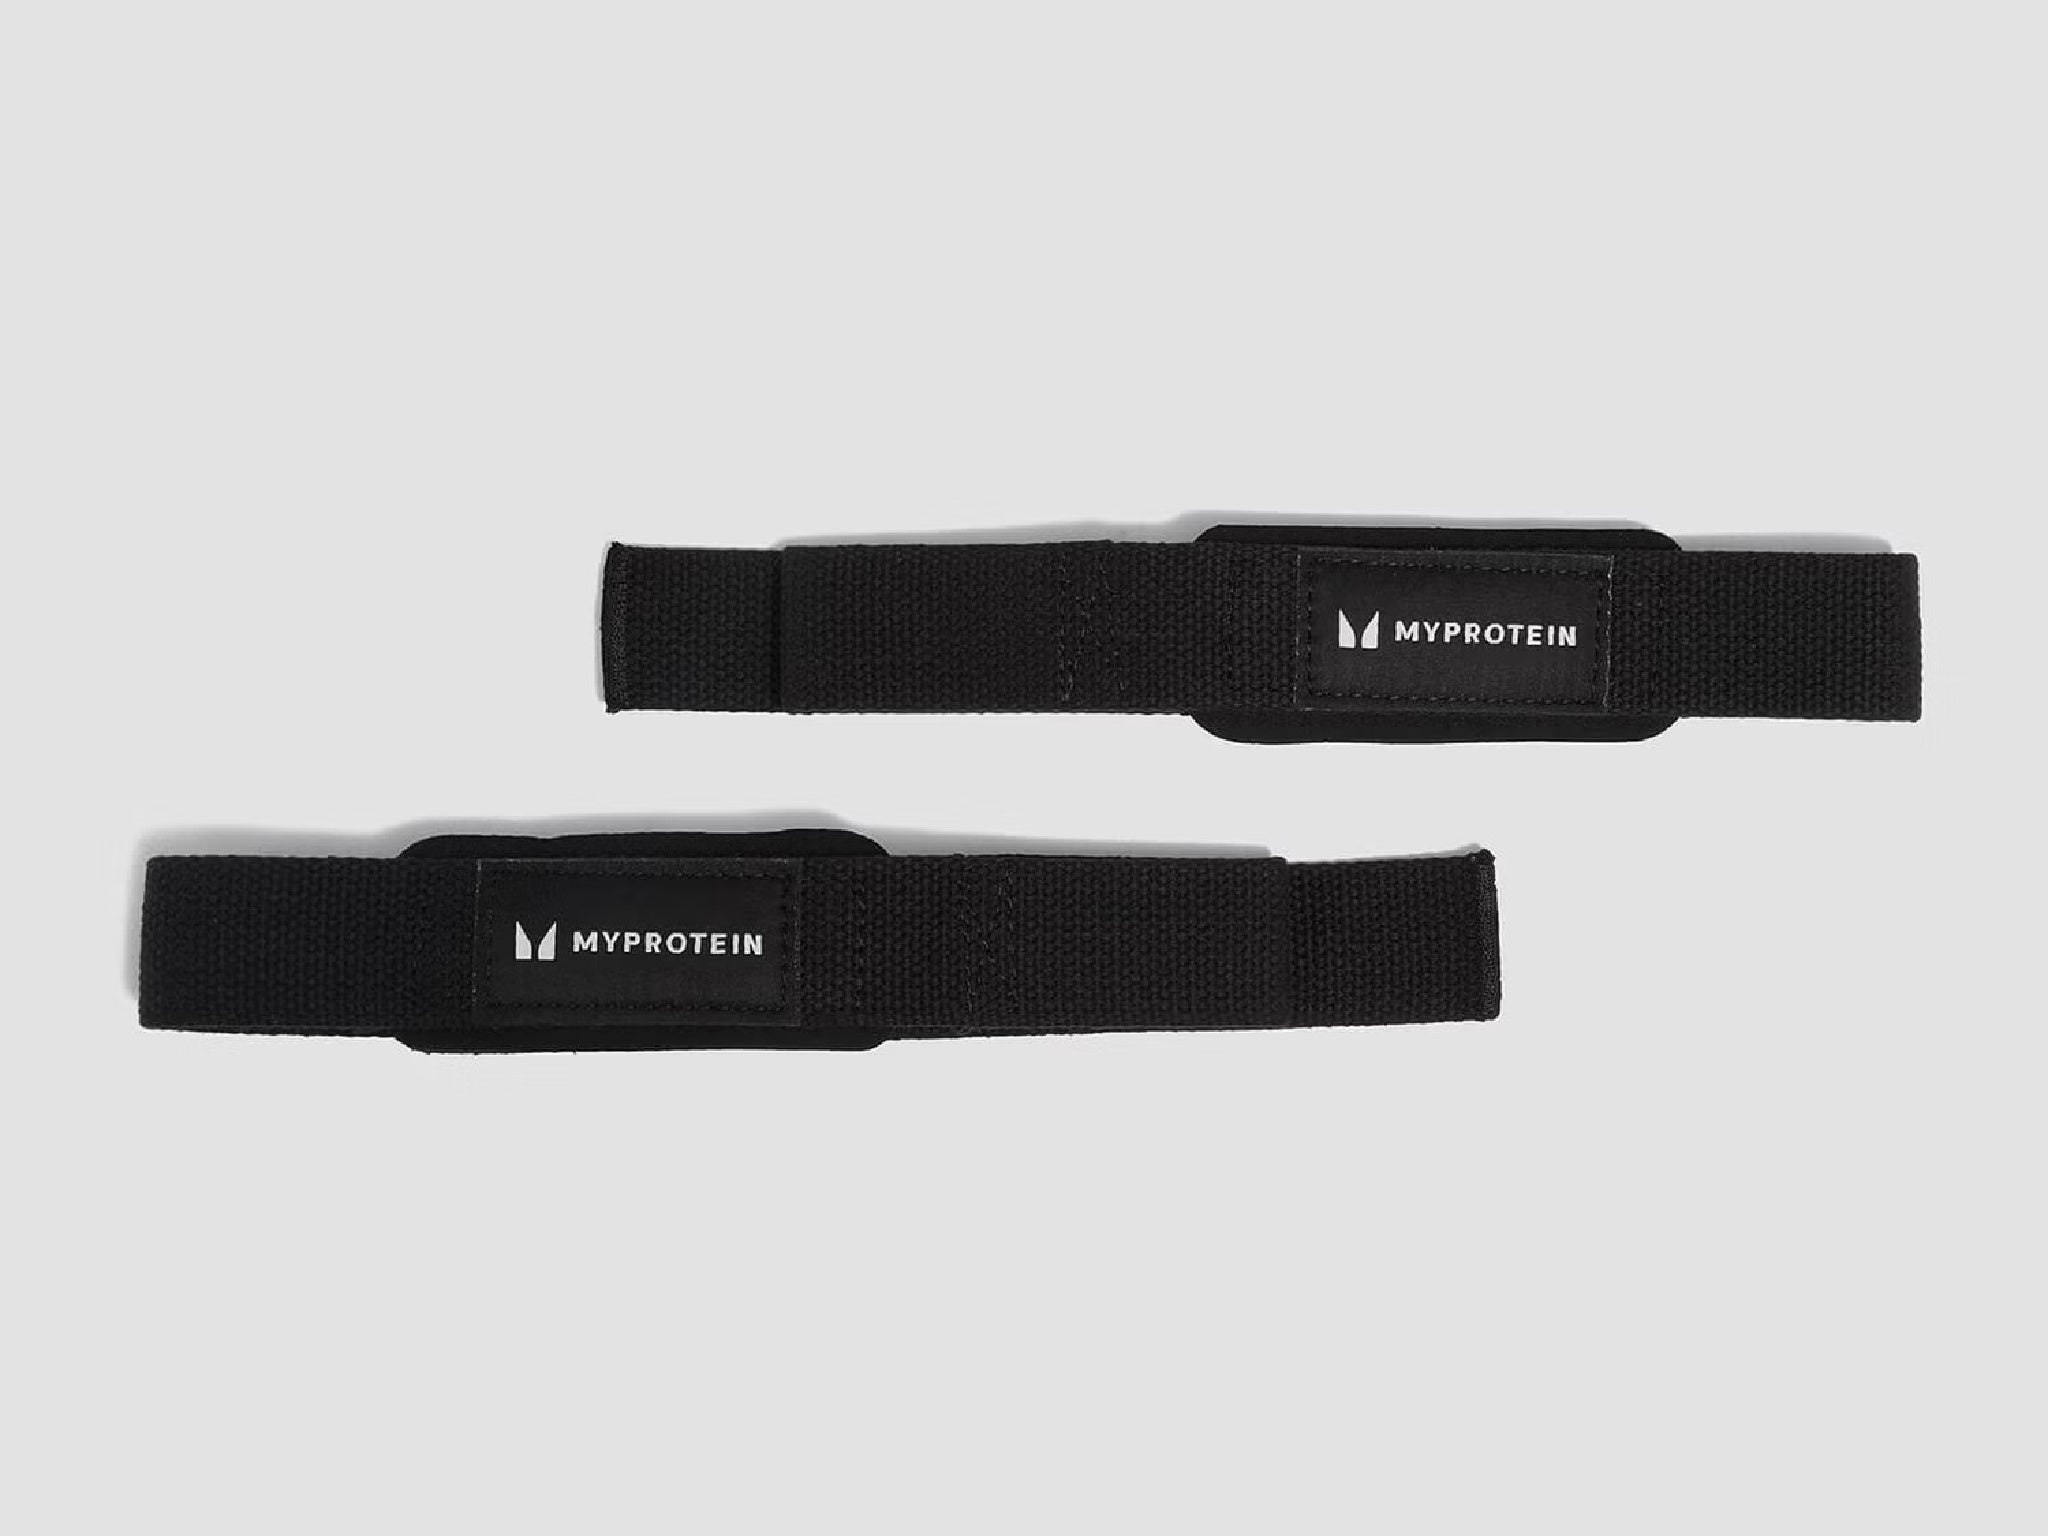 The Myprotein lifting straps have extra padding for more comfort